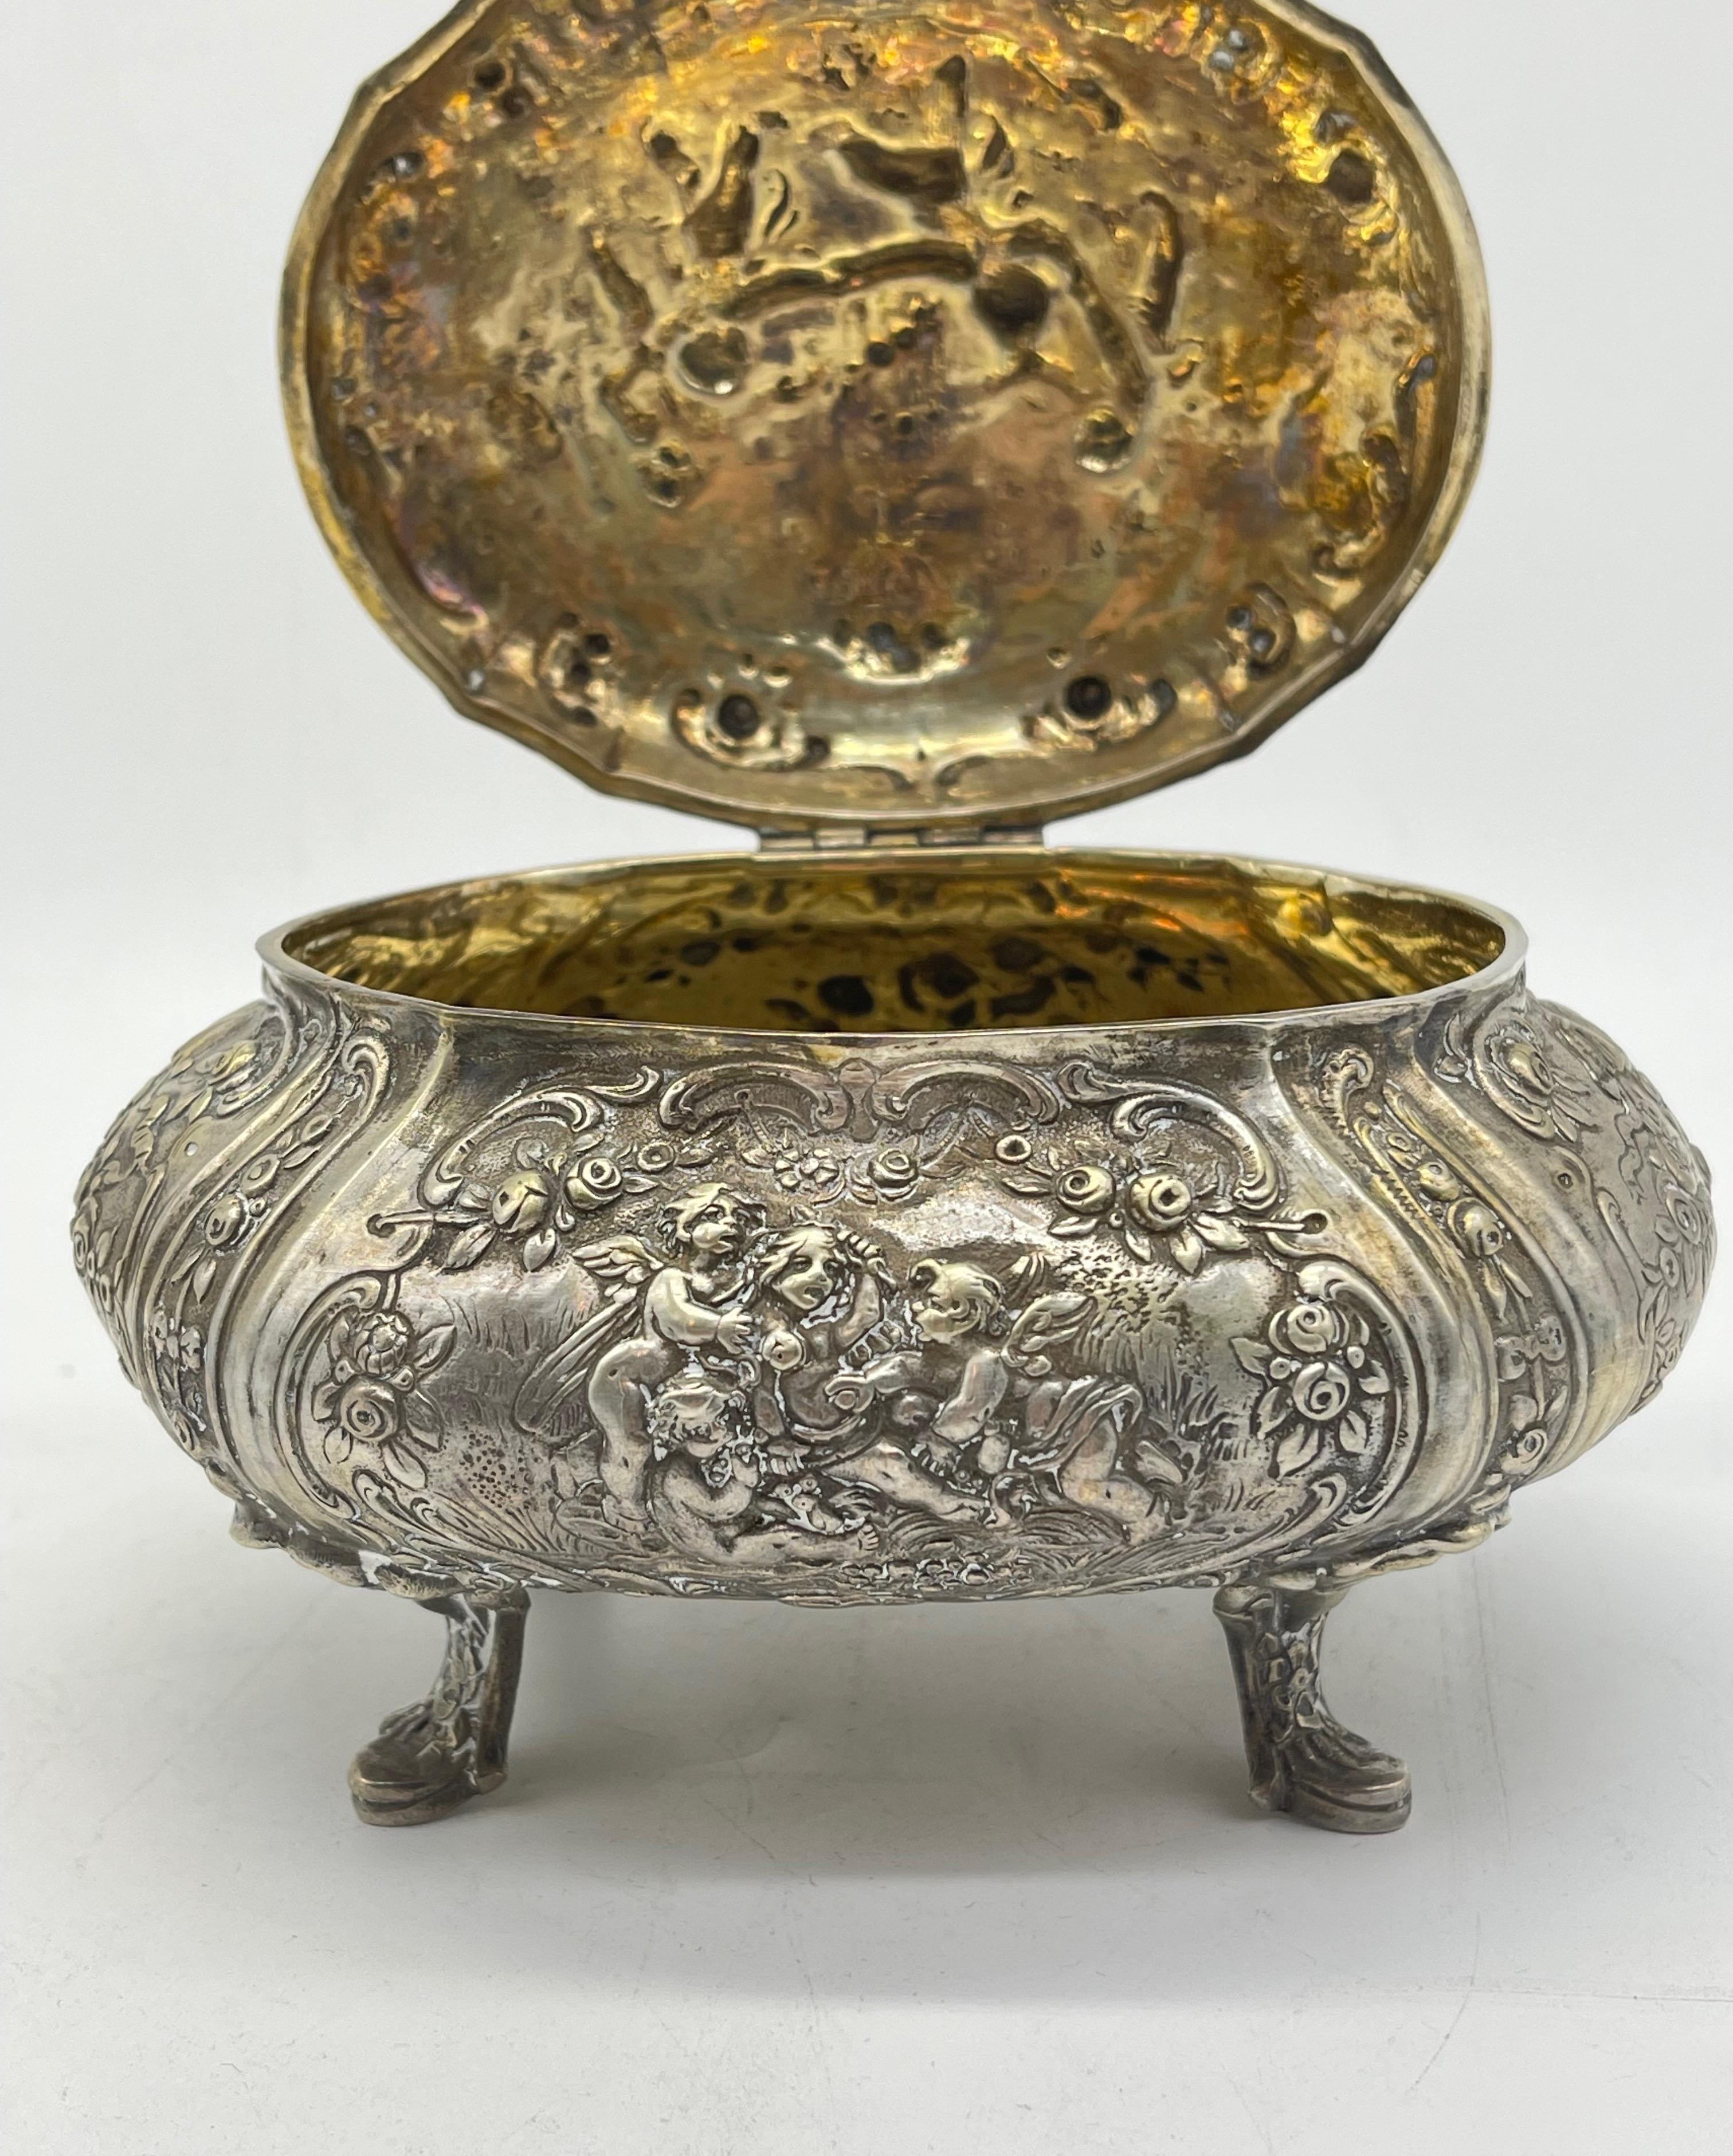 Exclusive Bonboniere / Sugar Lidded box 800 Silver Germany gilded, Flowers Putto For Sale 5